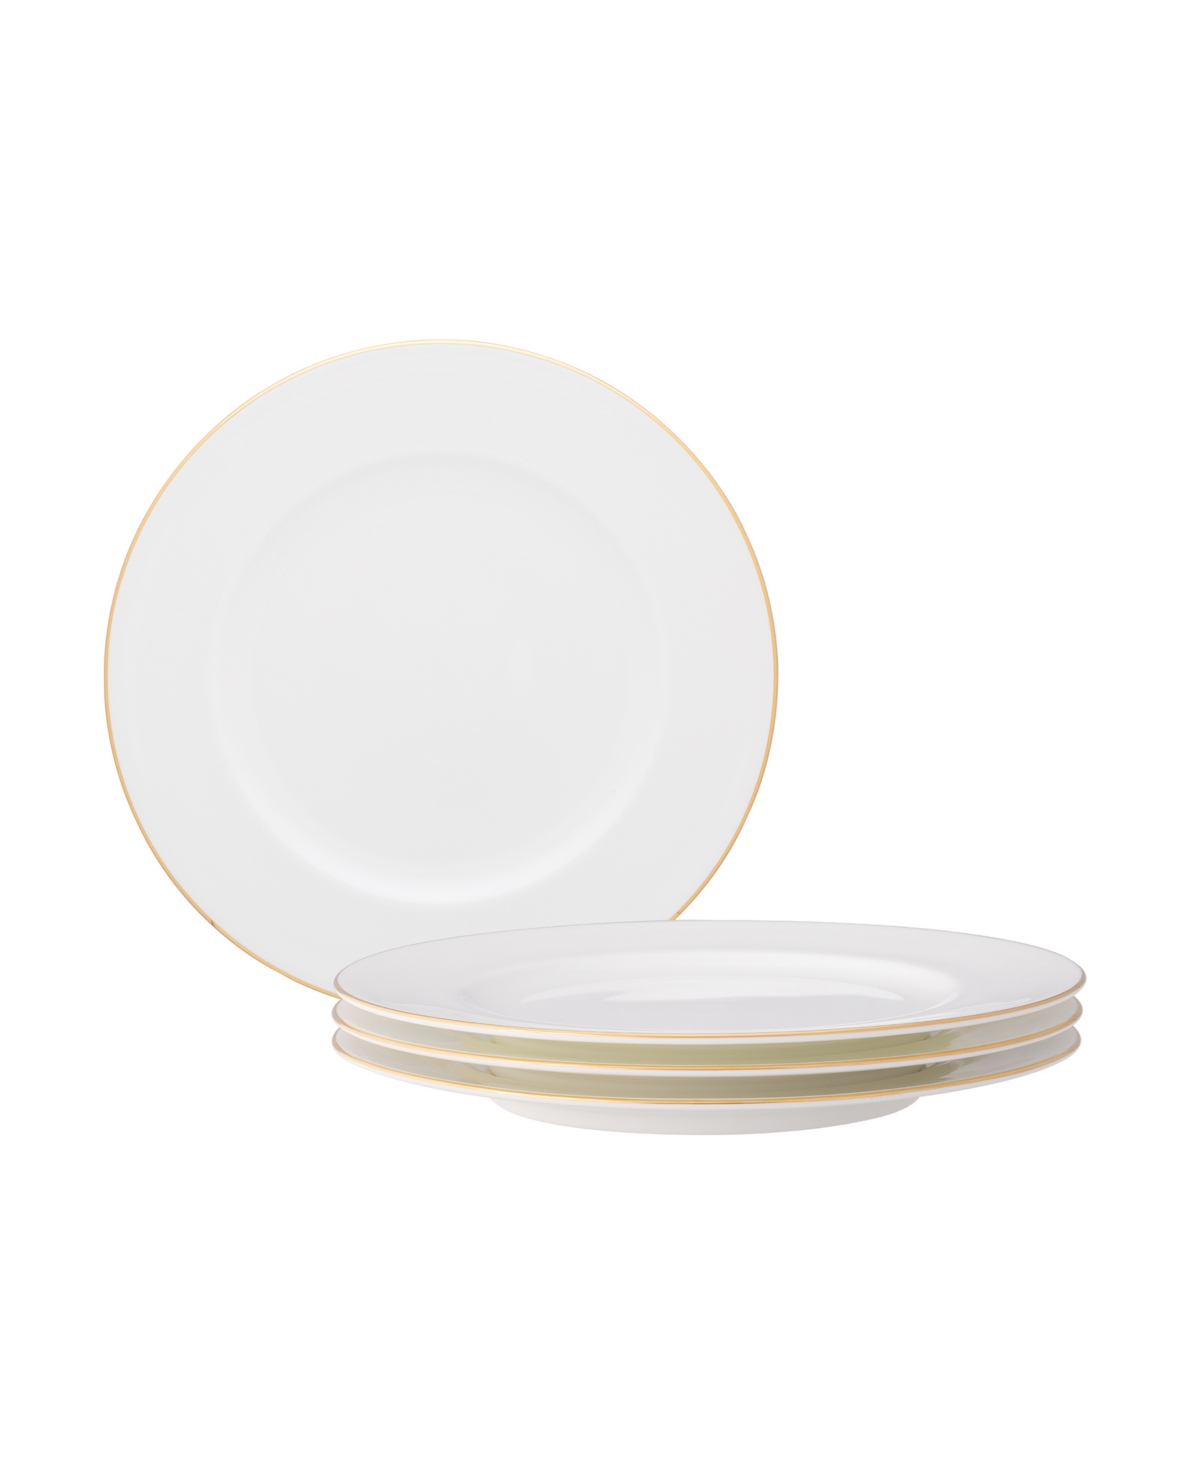 Noritake Accompanist Set Of 4 Bread Butter And Appetizer Plates, Service For 4 In White